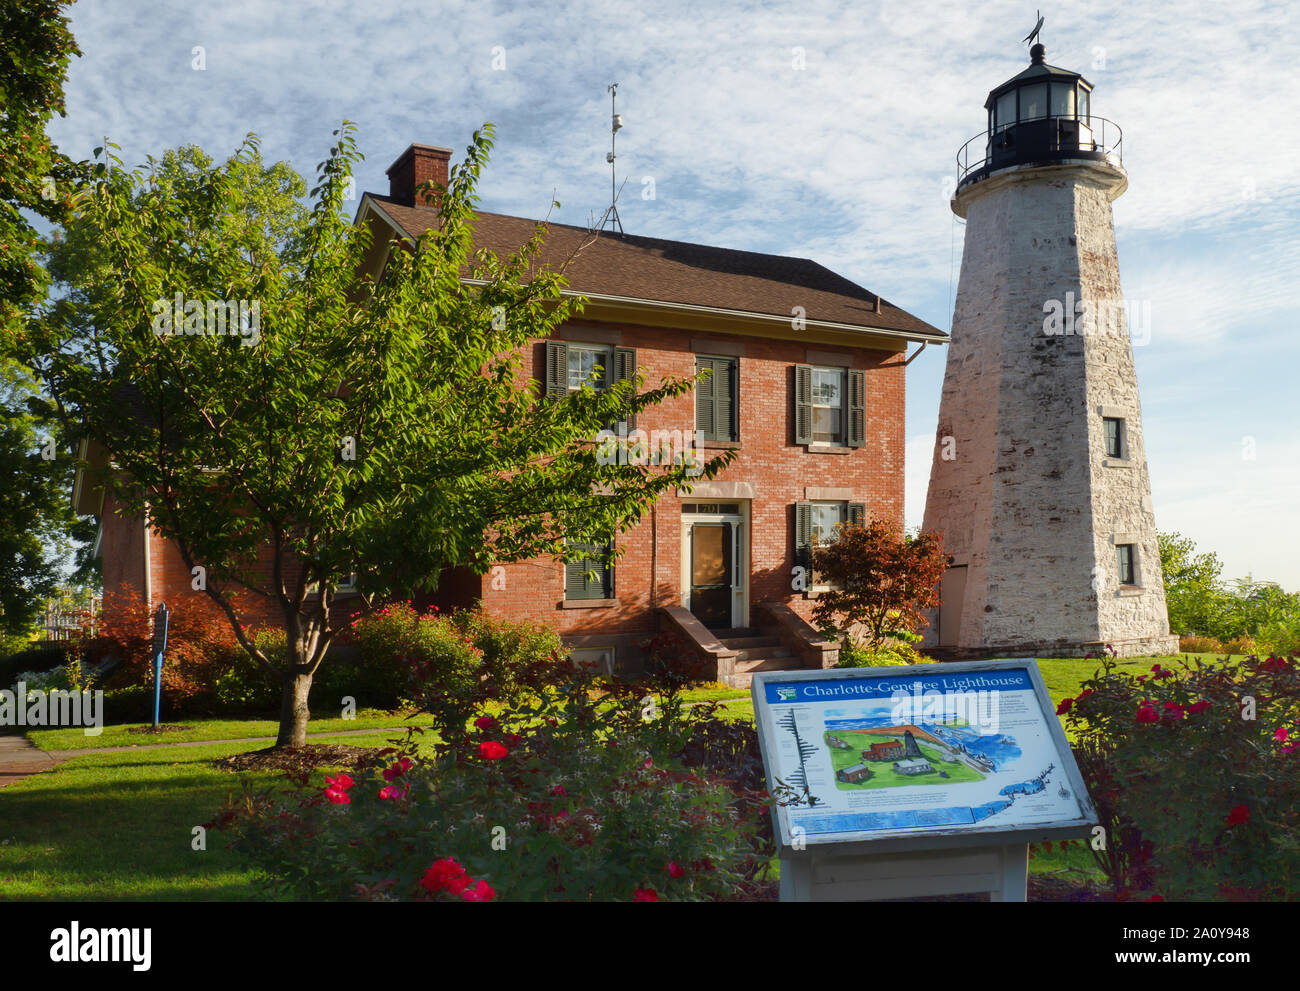 Rochester, New York, USA. September 20, 2019. View of the Charlotte-Genesee Lighthouse, built in 1822, in Charlotte, a suburb of Rochester, near the s Stock Photo